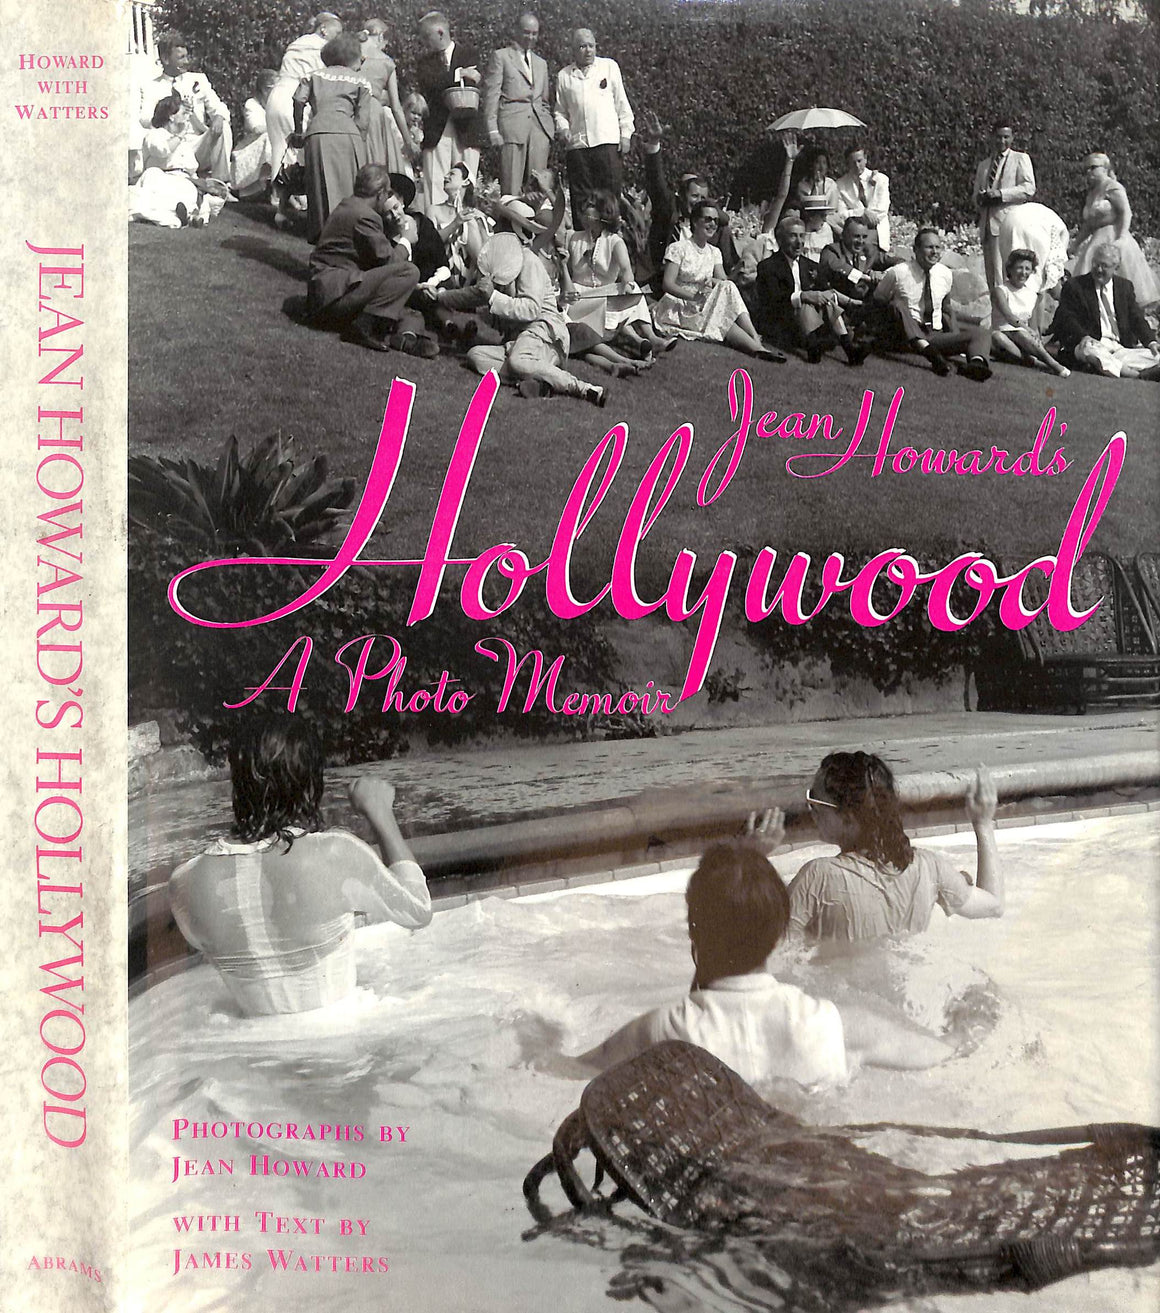 "Jean Howard's Hollywood A Photo Memoir" 1989 WATTERS, James [text by]